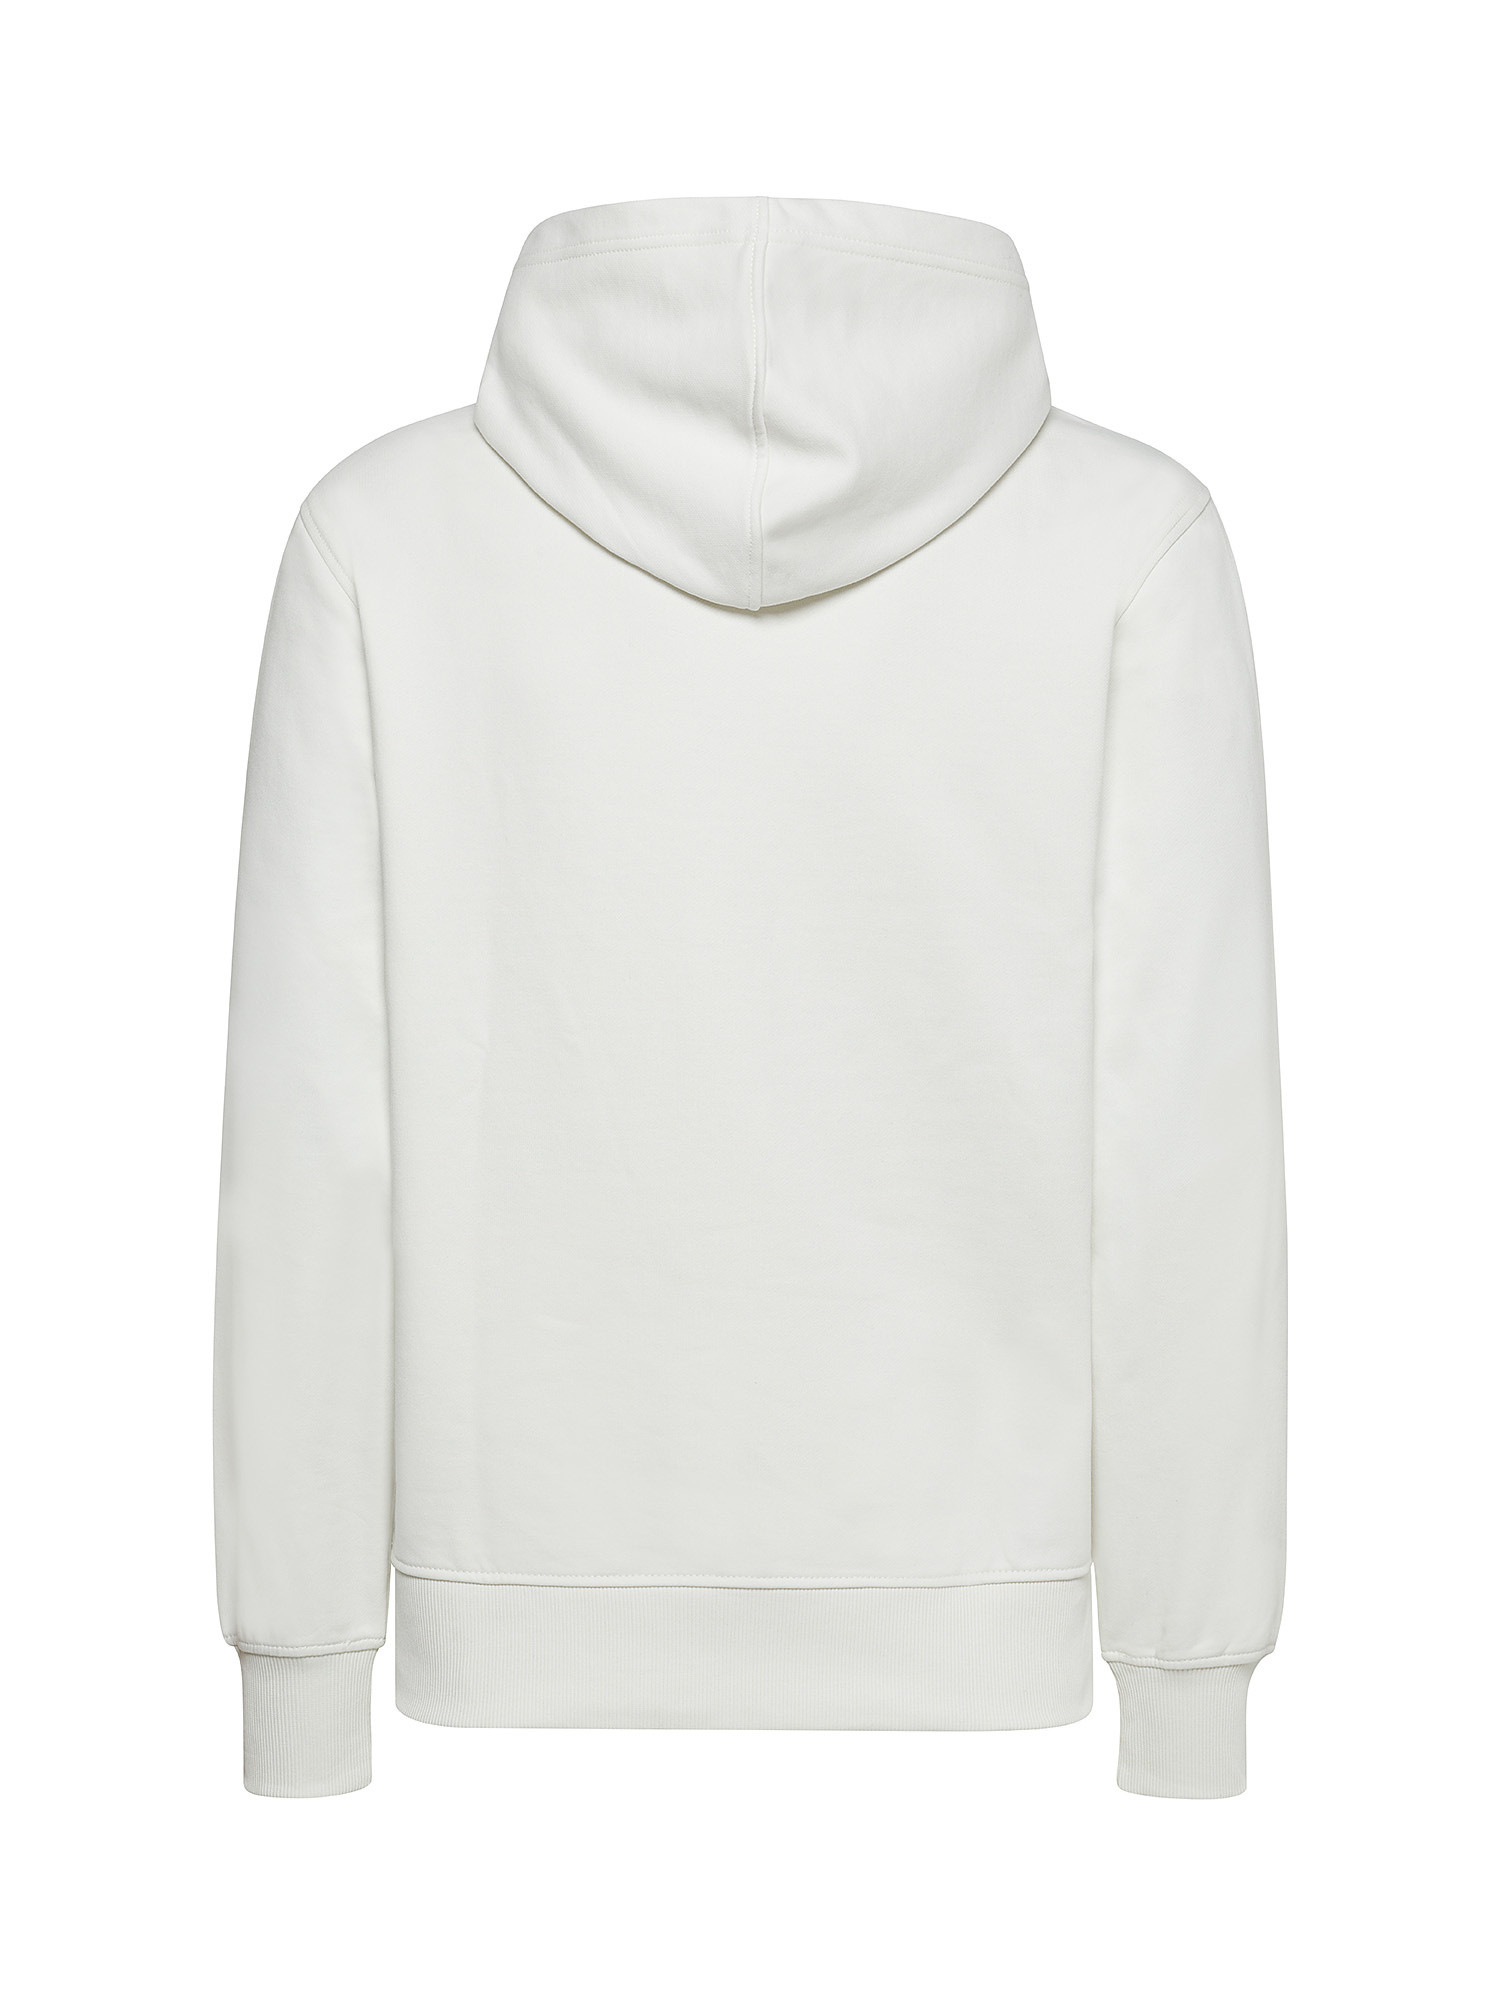 Calvin Klein Jeans -  Cotton hooded sweatshirt with logo, White, large image number 1